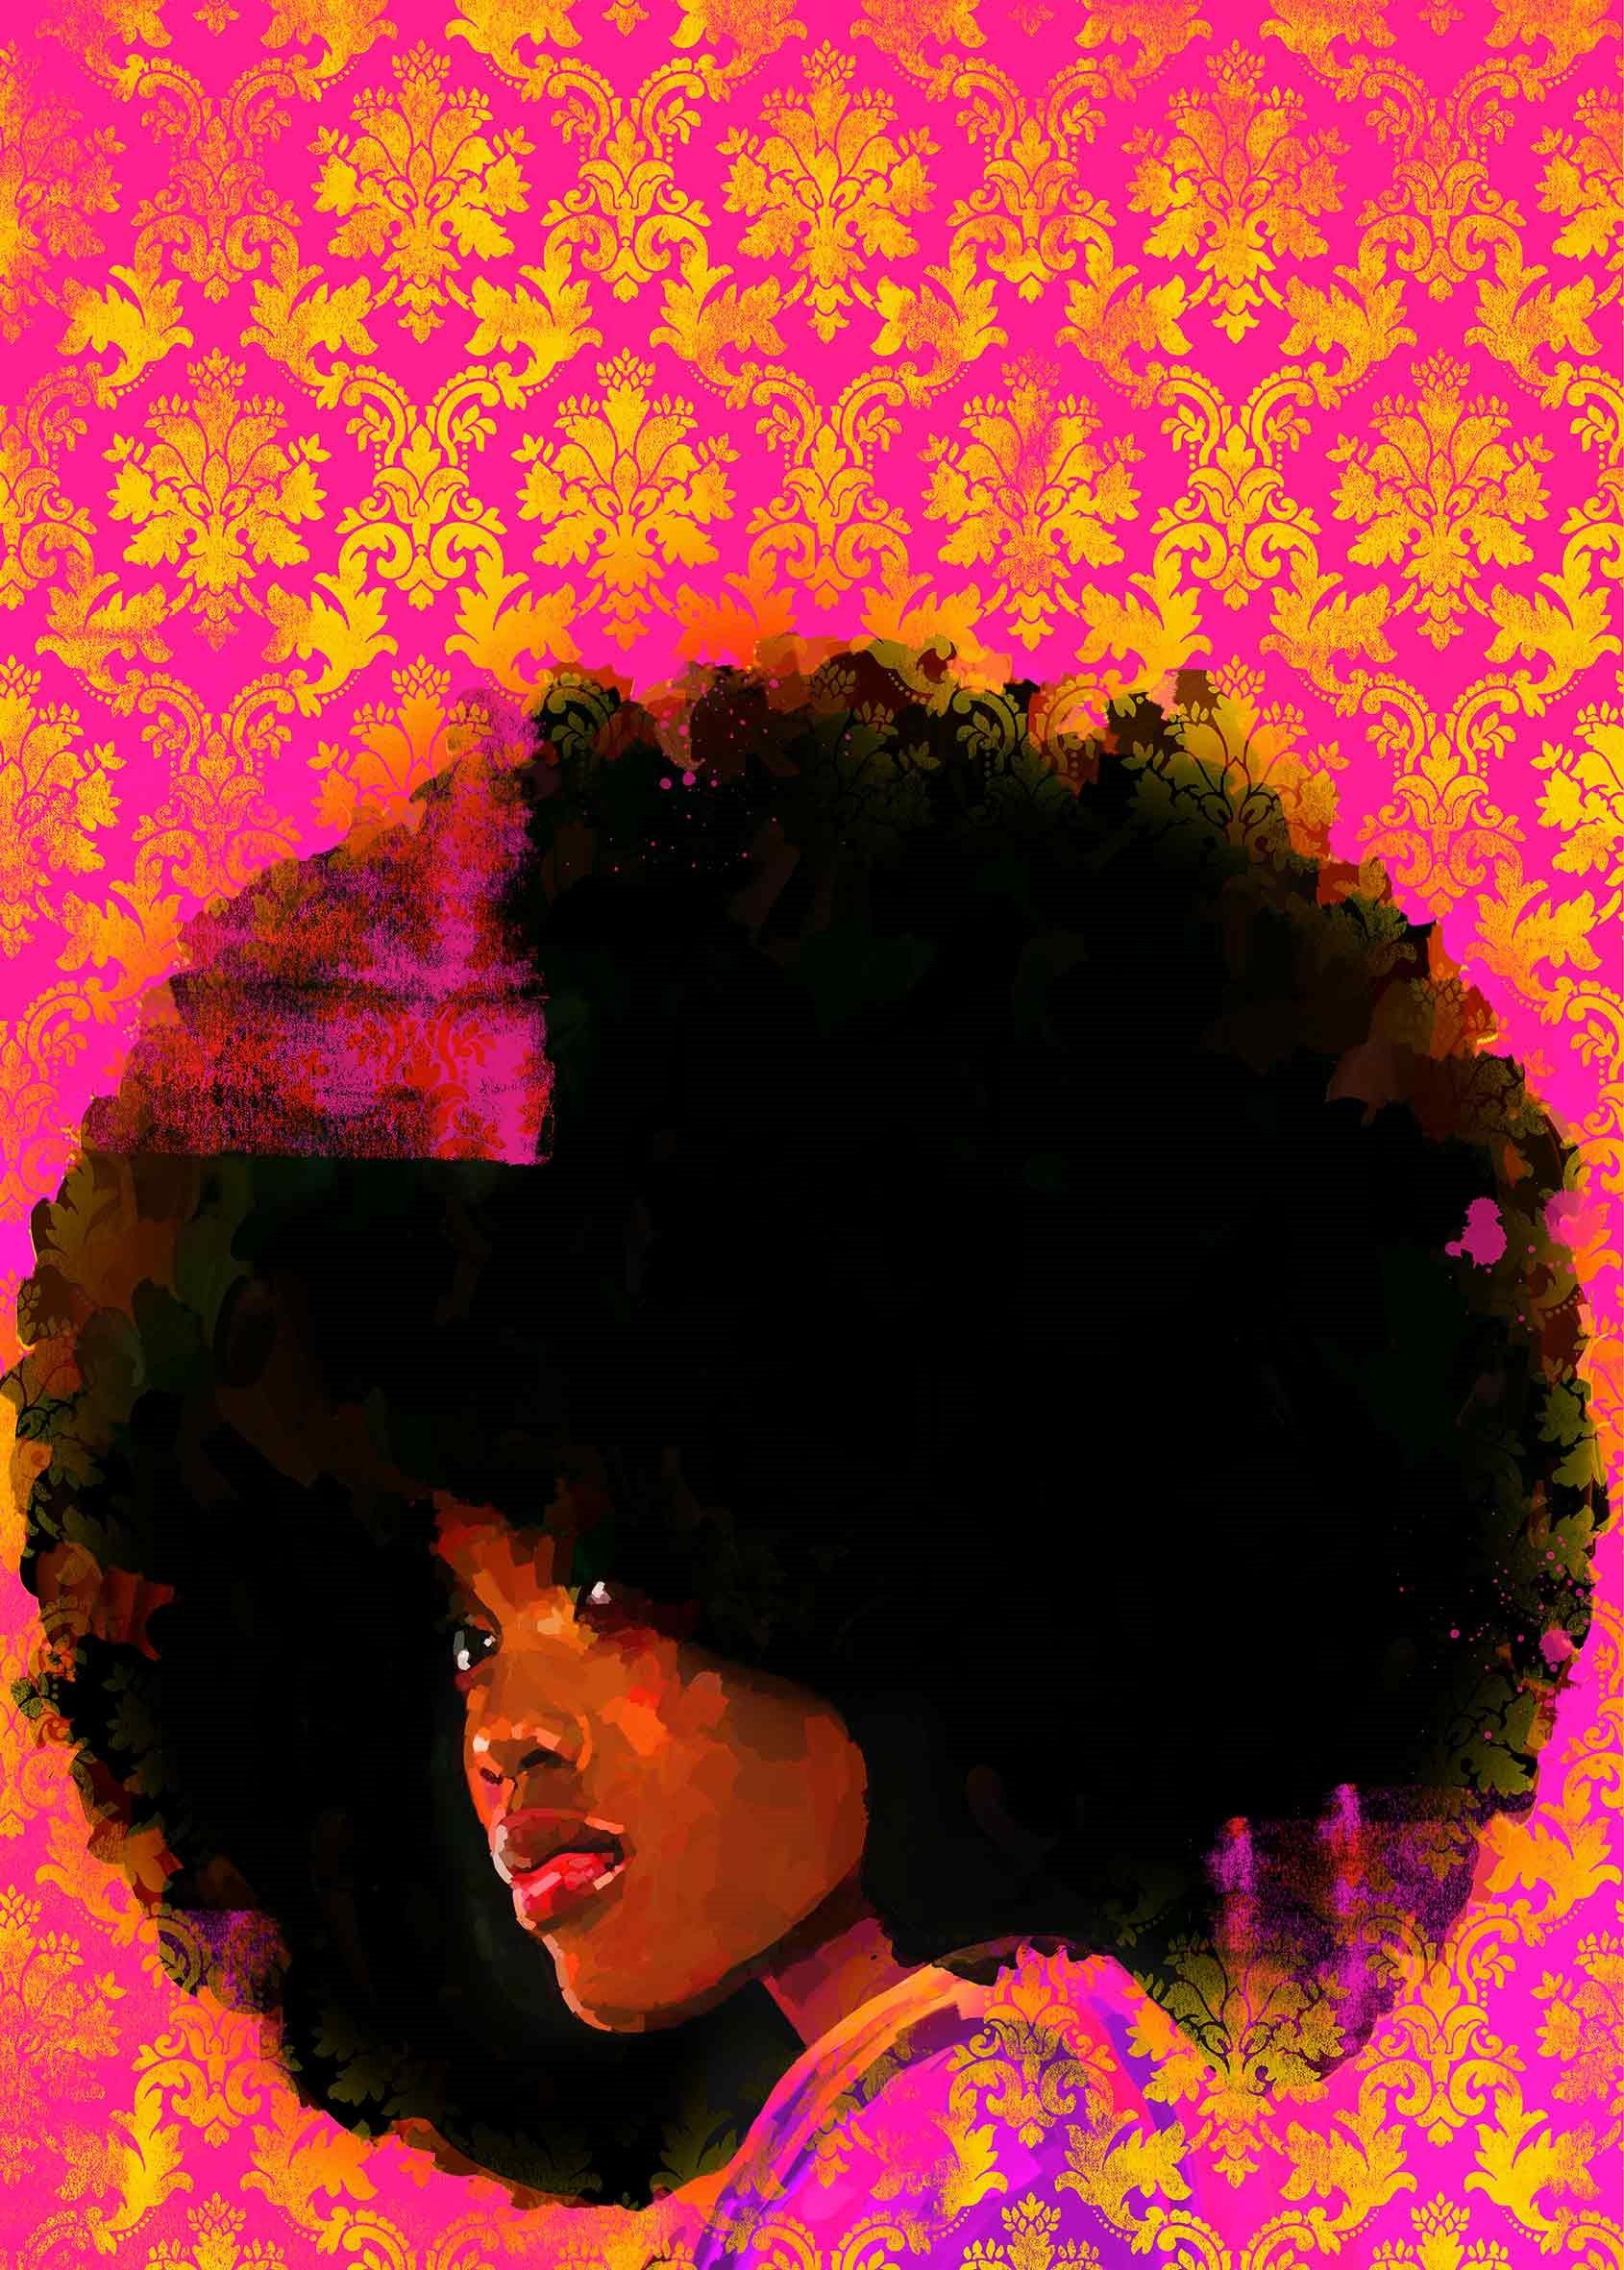 Fro - Black Girl Power! Graphic/POP Art: Collage/Acrylic as a Ltd Edition Print